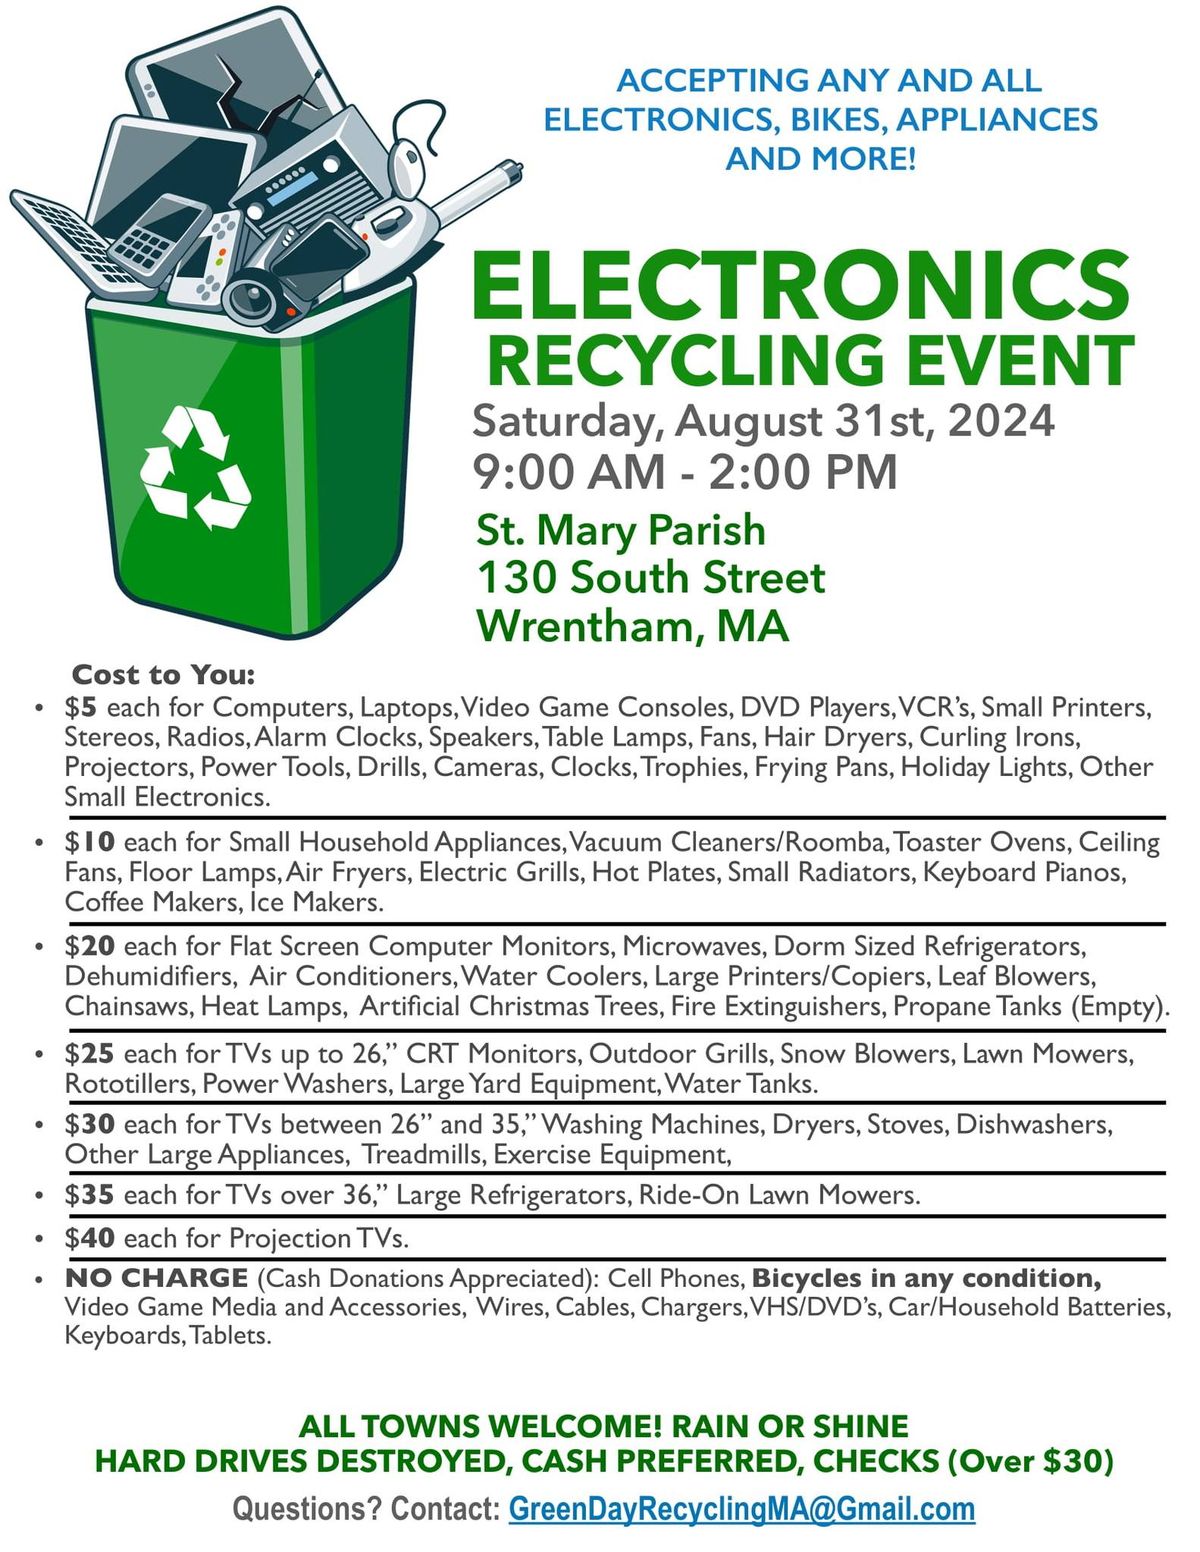 Wrentham Electronics Recycling Event